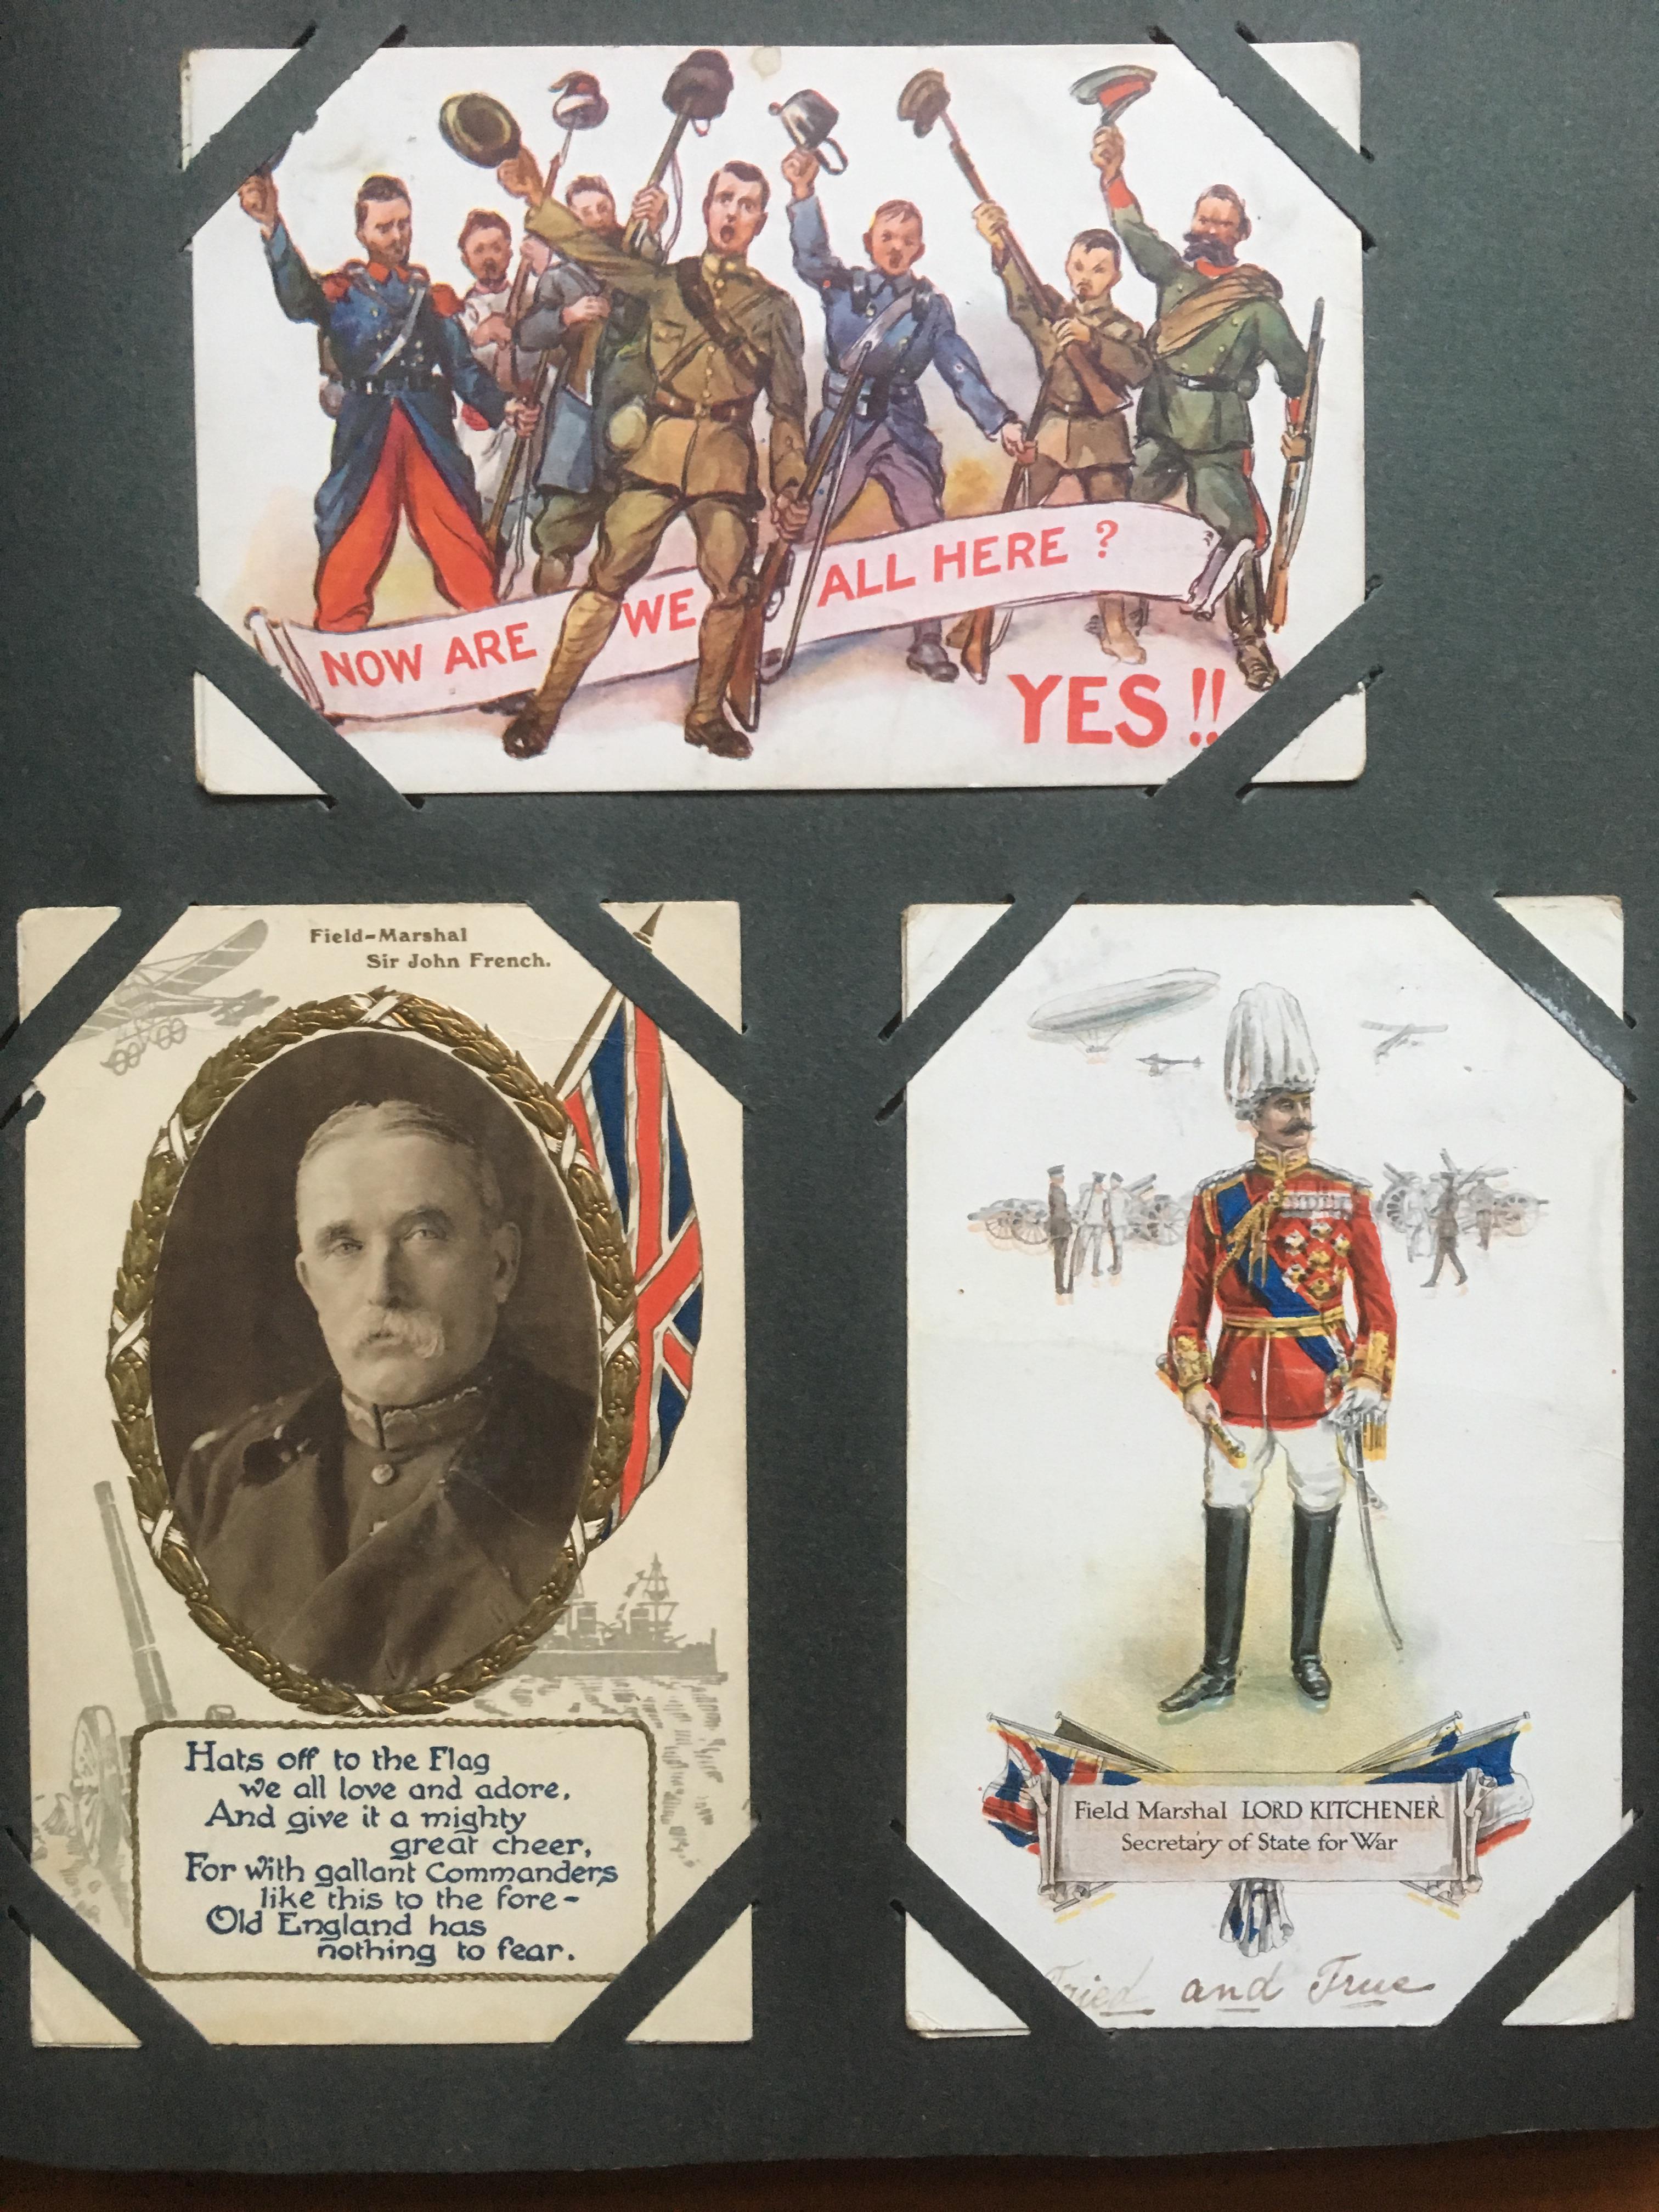 CORNER SLOT ALBUM OF MILITARY POSTCARDS, ARTISTS WITH HARRY PAYNE, MUCH WW1 WITH COMIC, SENTIMENT, - Image 10 of 19